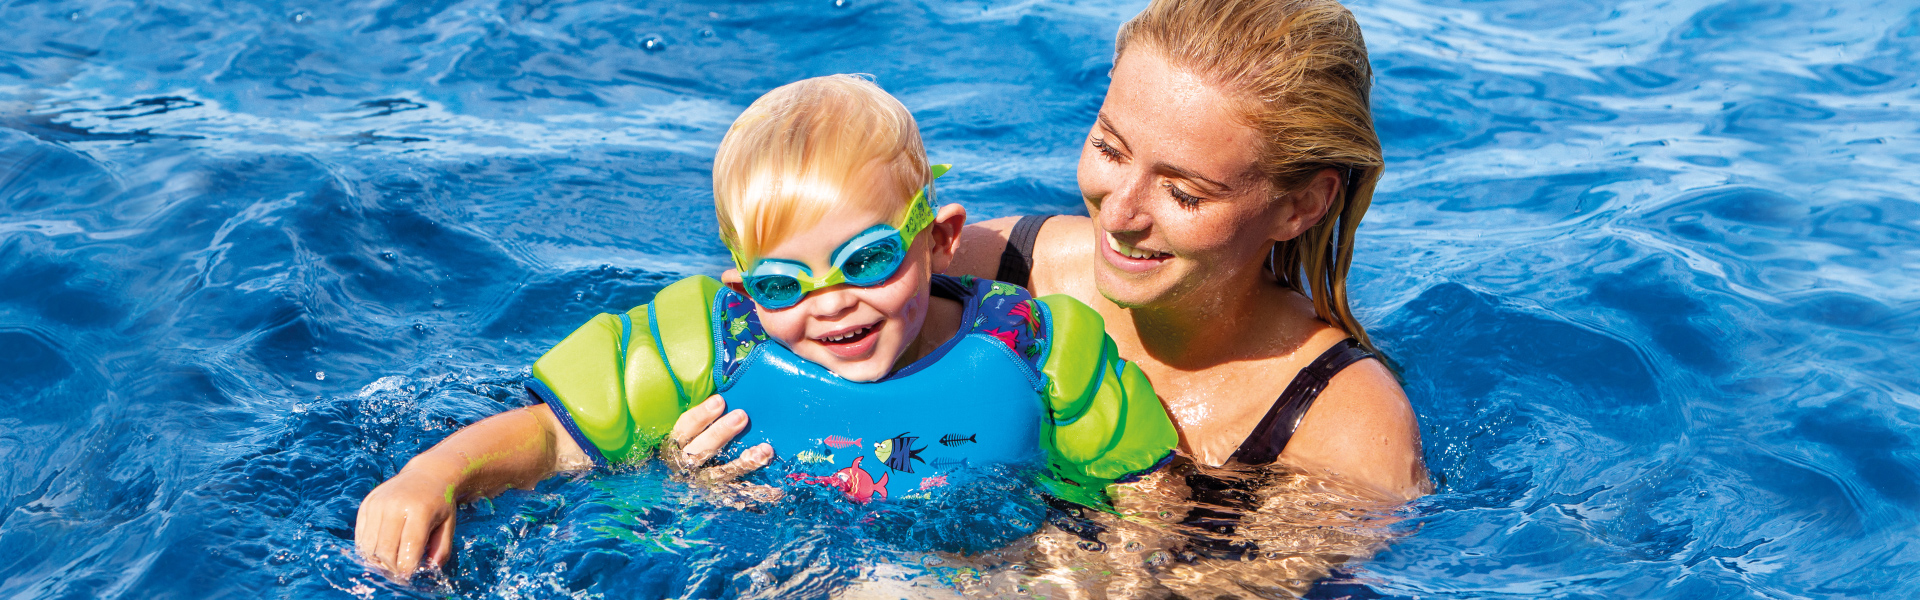 Parents’ Guide: Tips for Putting a Swim Cap on Your Child, Fuss-free!